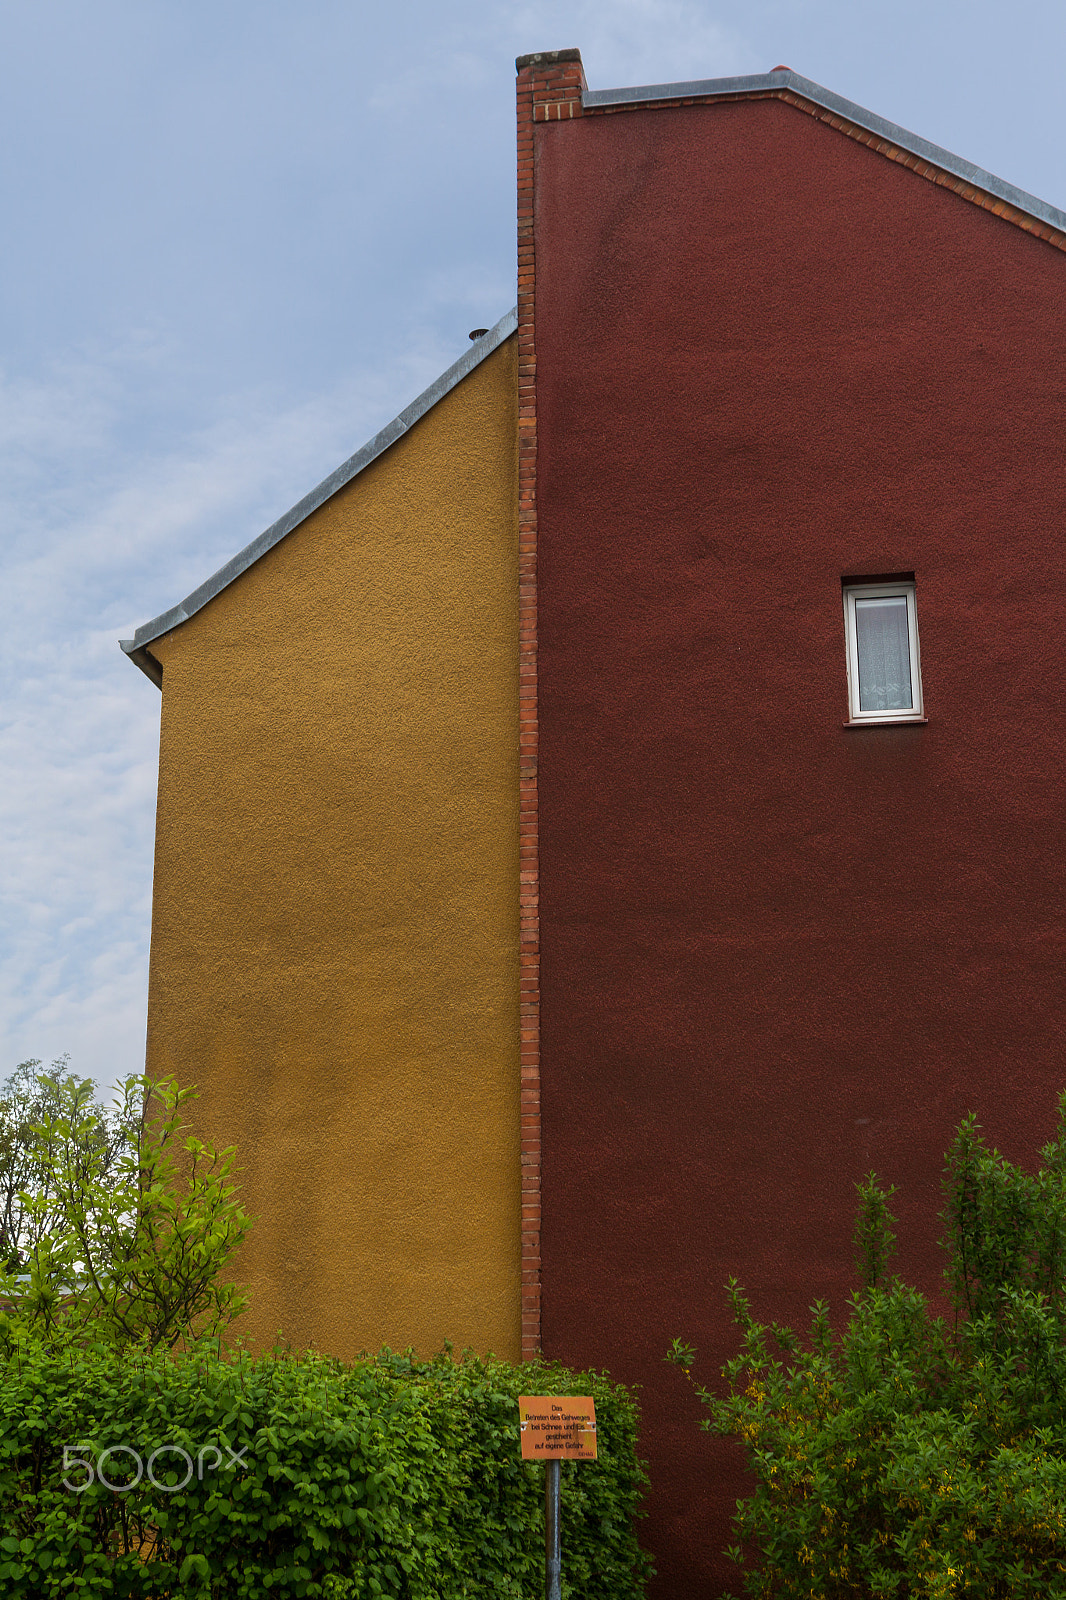 Canon EOS 60D sample photo. Hufeisensiedlung, a modern housing world heritage photography